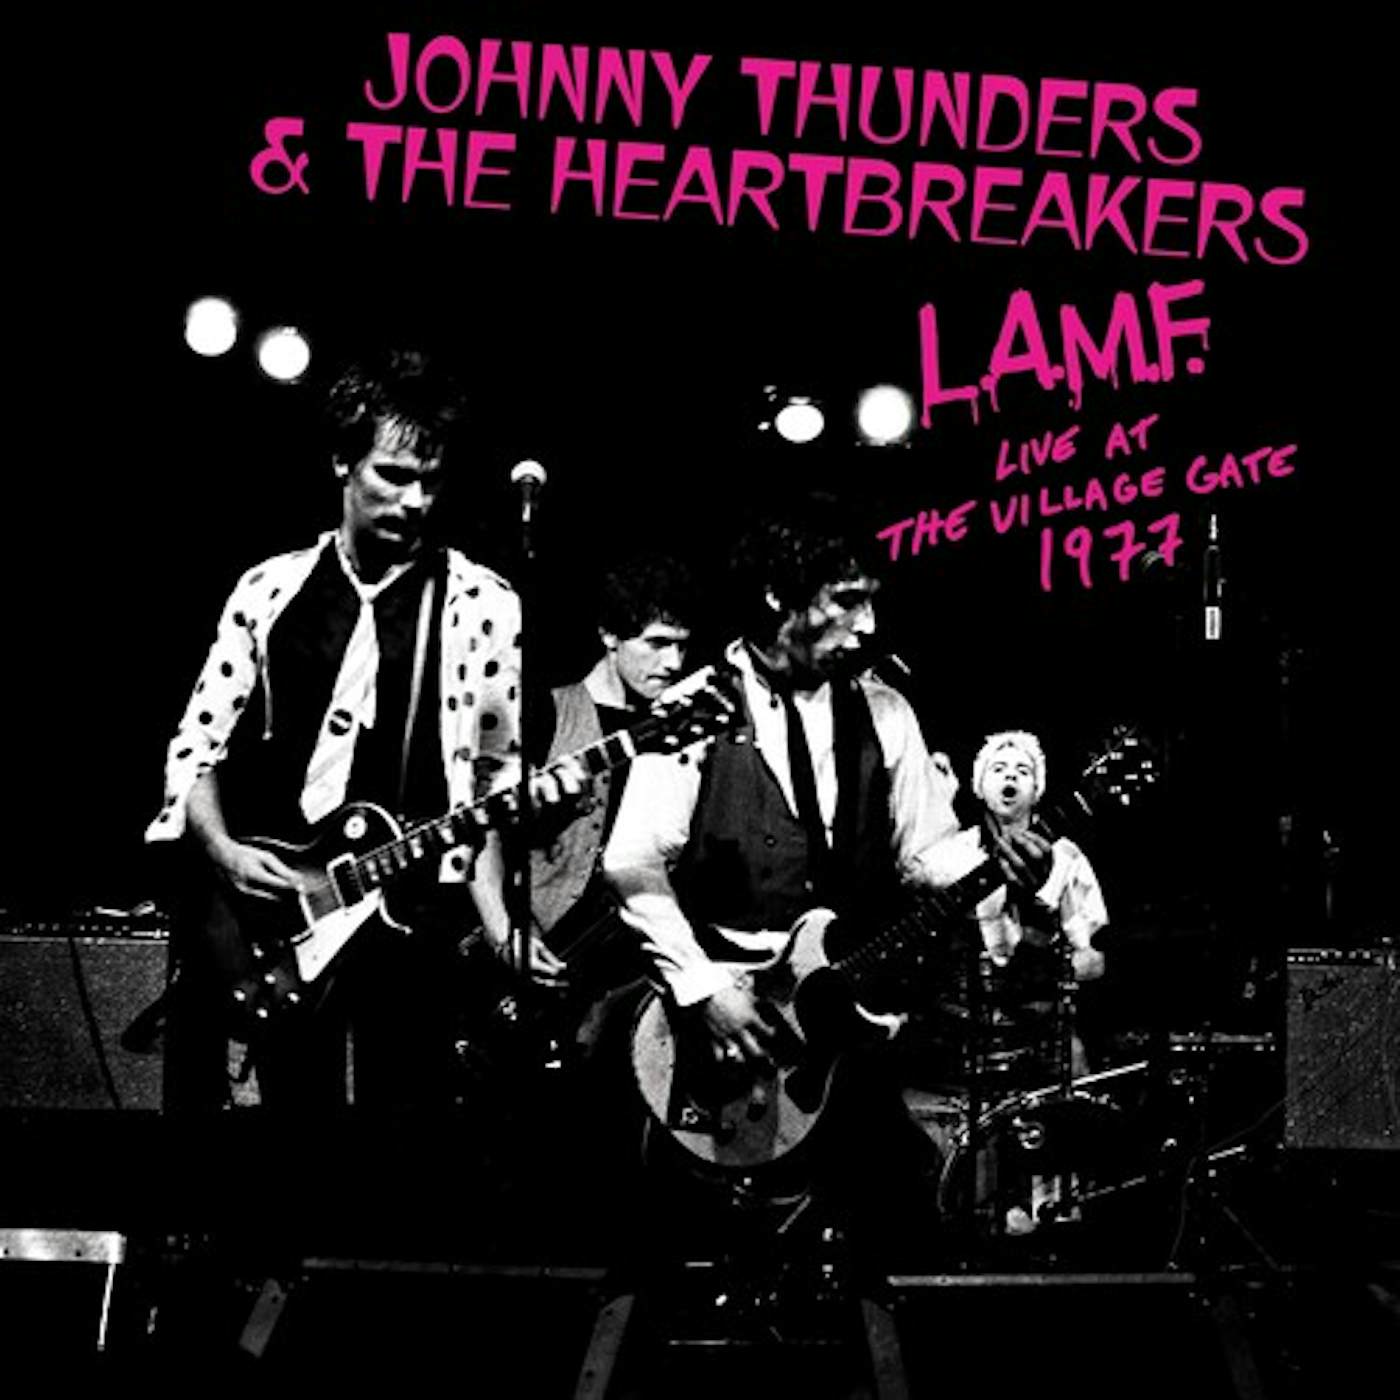 Johnny Thunders & The Heartbreakers L.A.M.F. Live at the Village Gate 1977 Vinyl Record